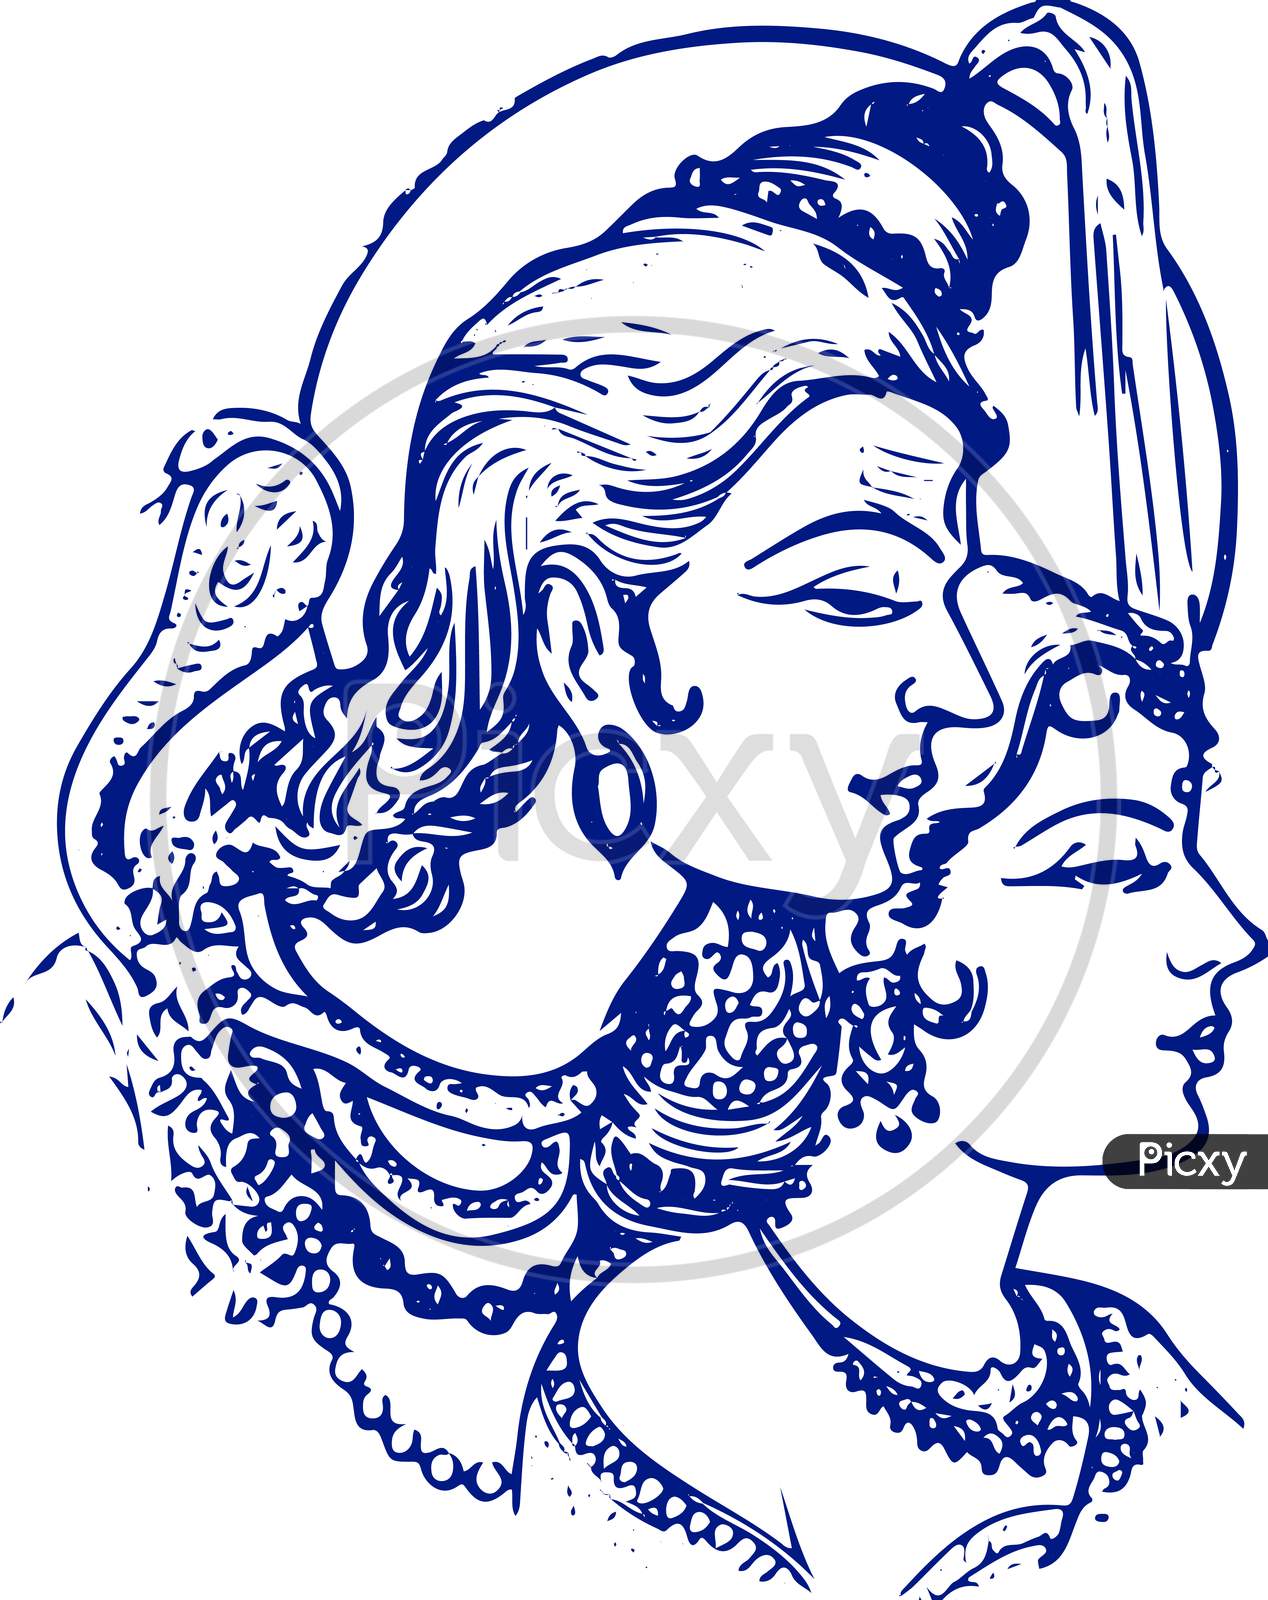 Drawing or sketch of lord shiva and parvati editable outline  wall  stickers spirituality indian india  myloviewcom